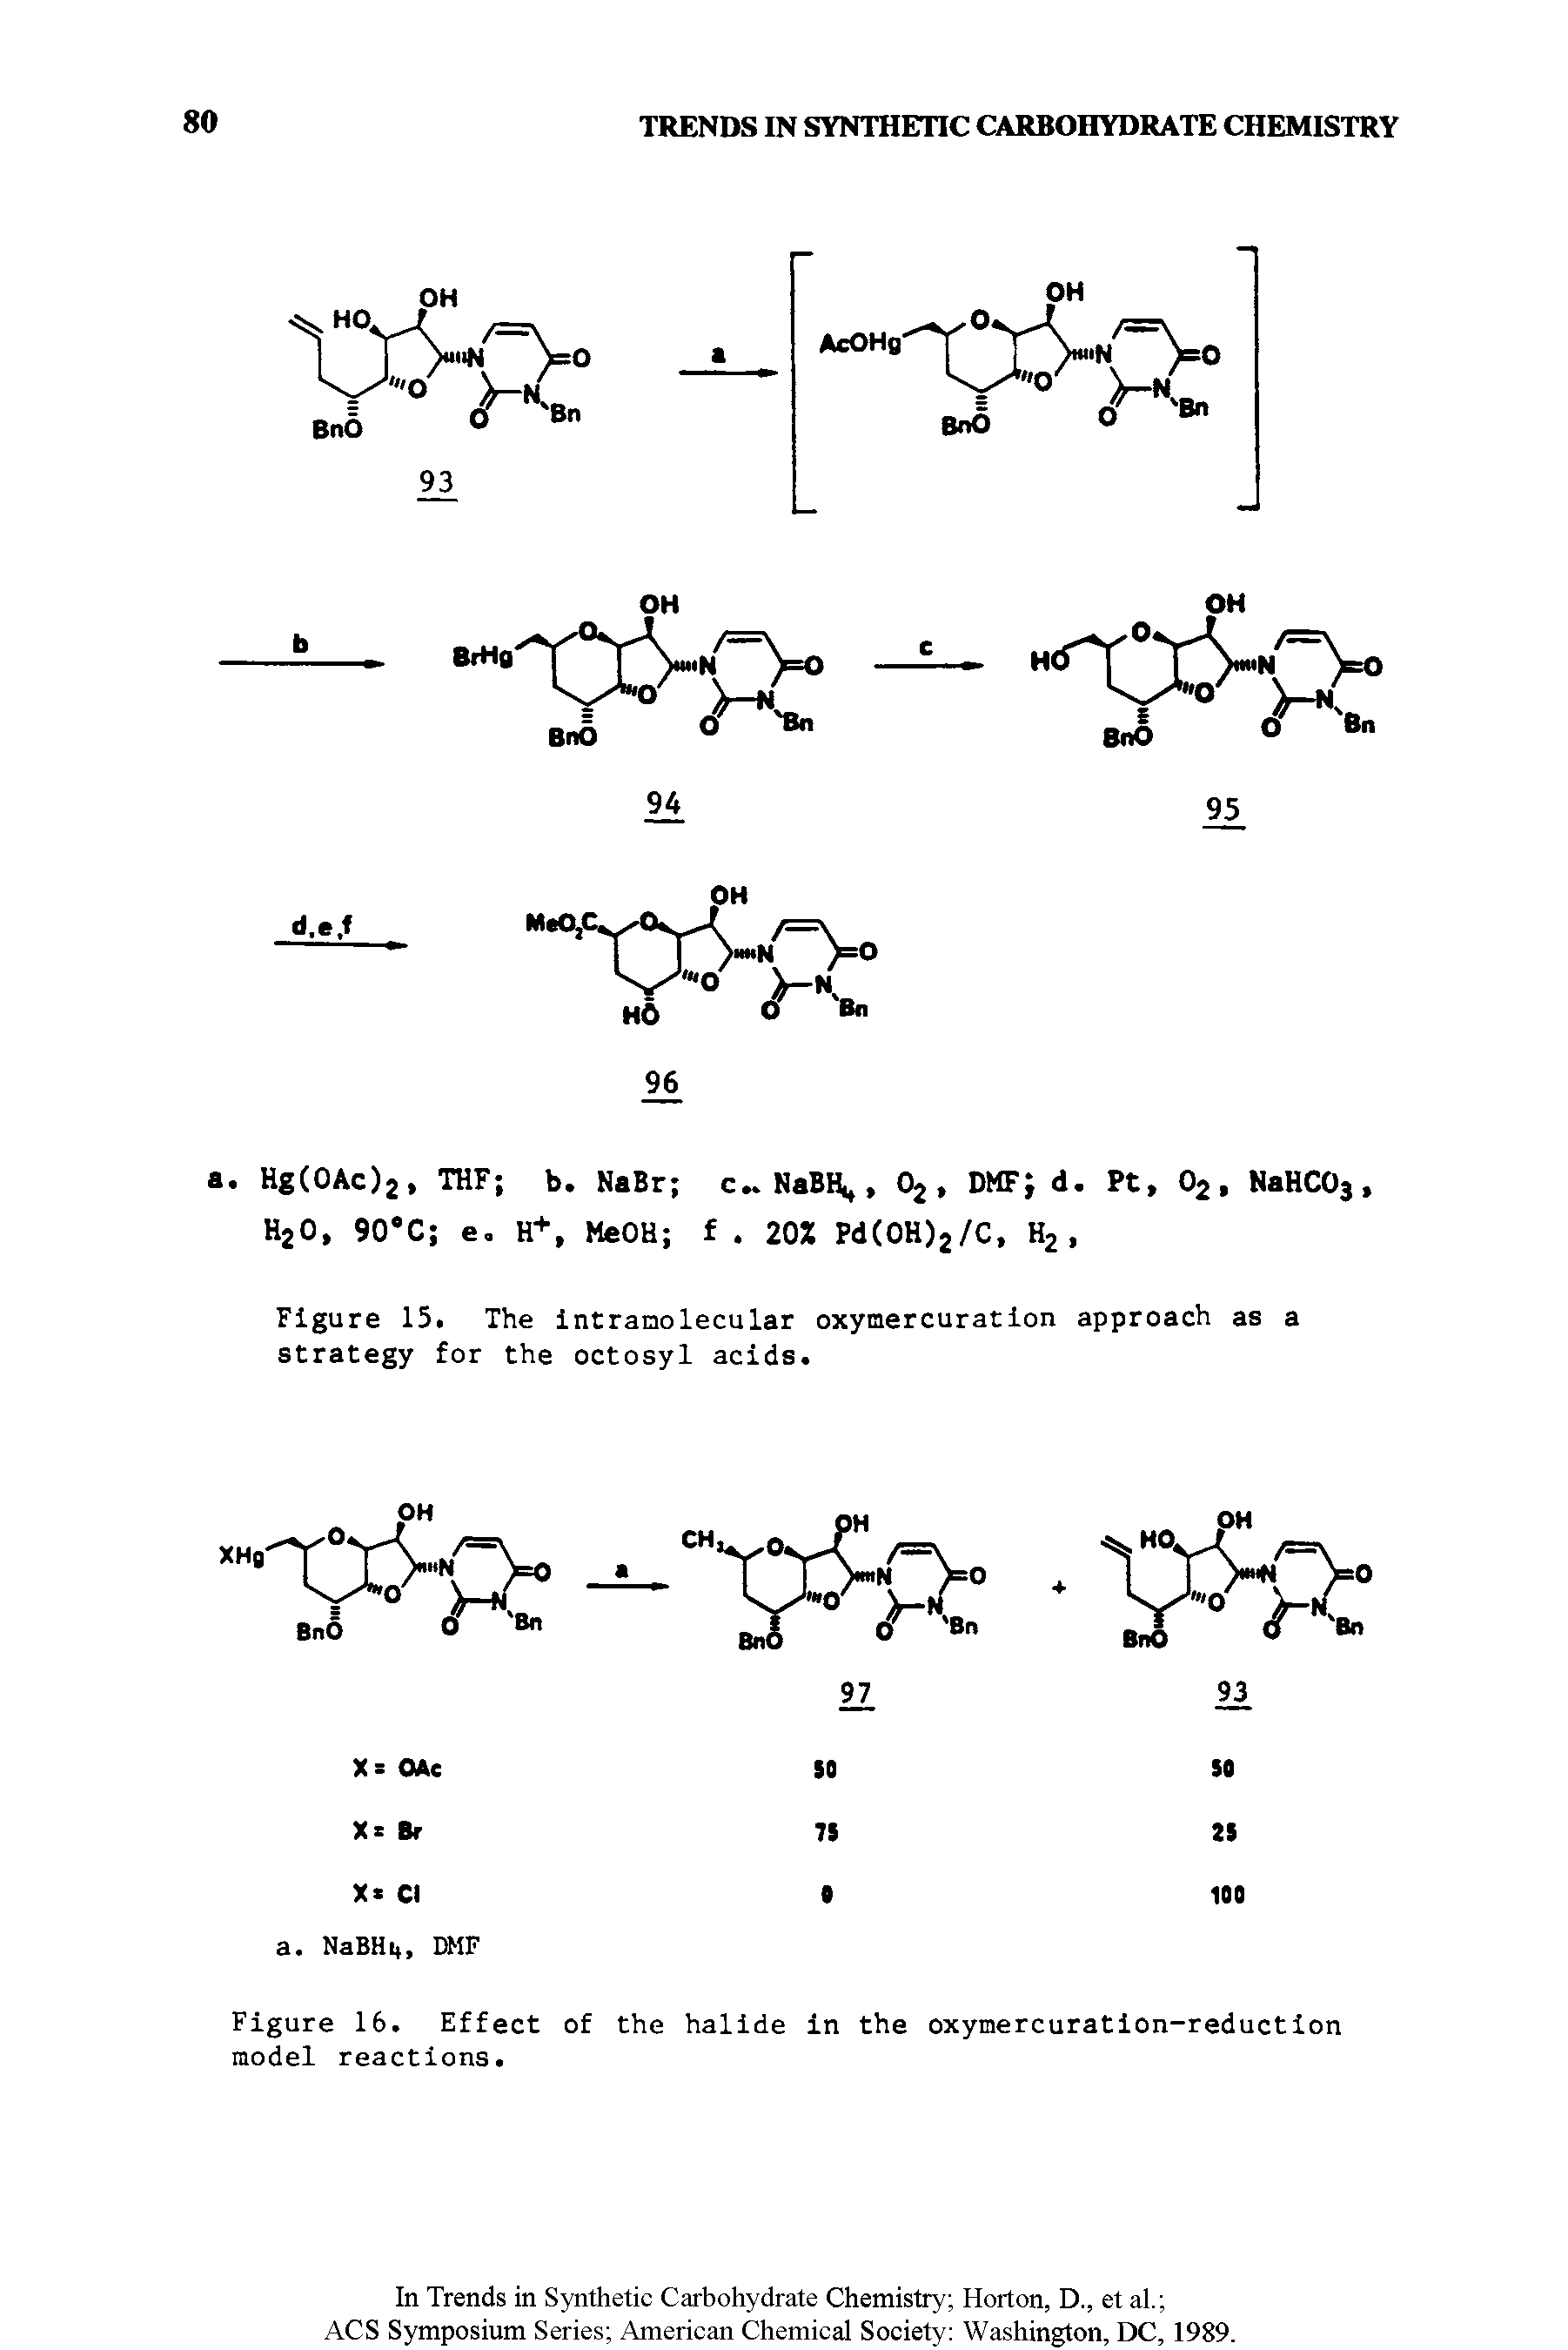 Figure 15. The intramolecular oxymercuration approach as a strategy for the octosyl acids.